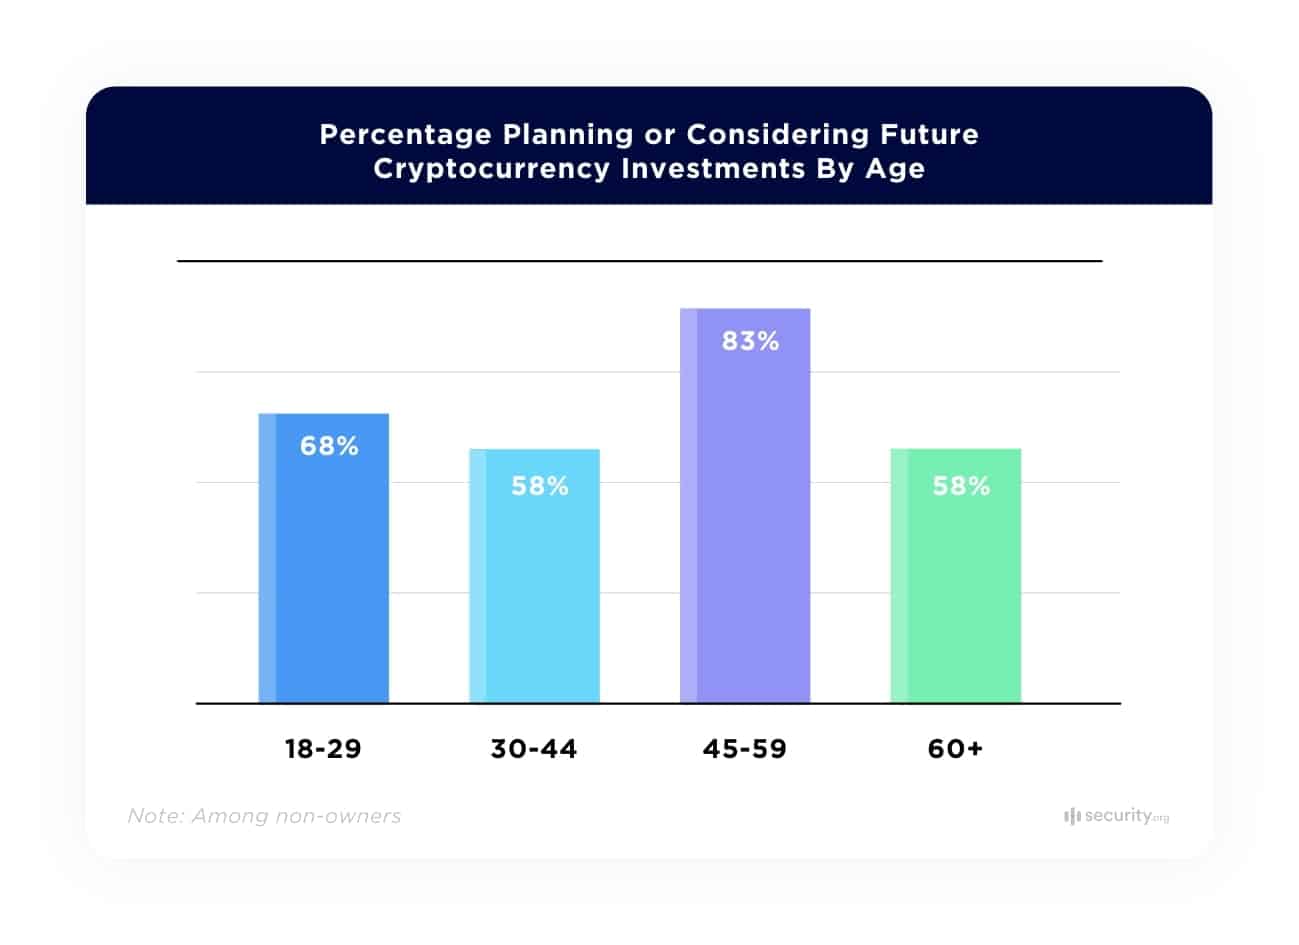 Percentage Planning or Considering Future Cryptocurrency Investments By Age